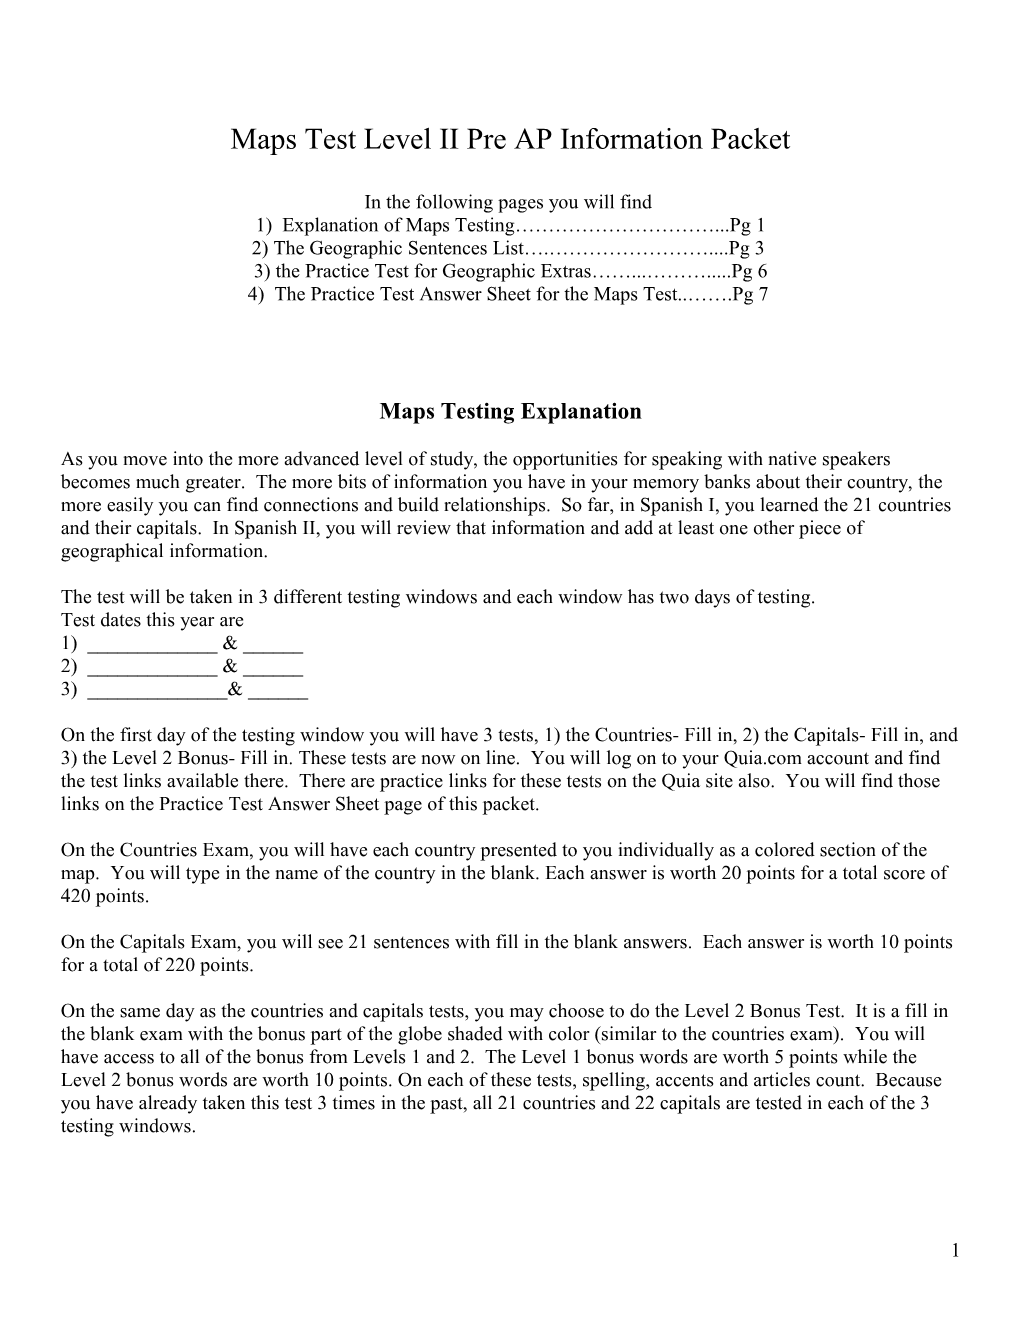 Maps Test Level III Information Packet